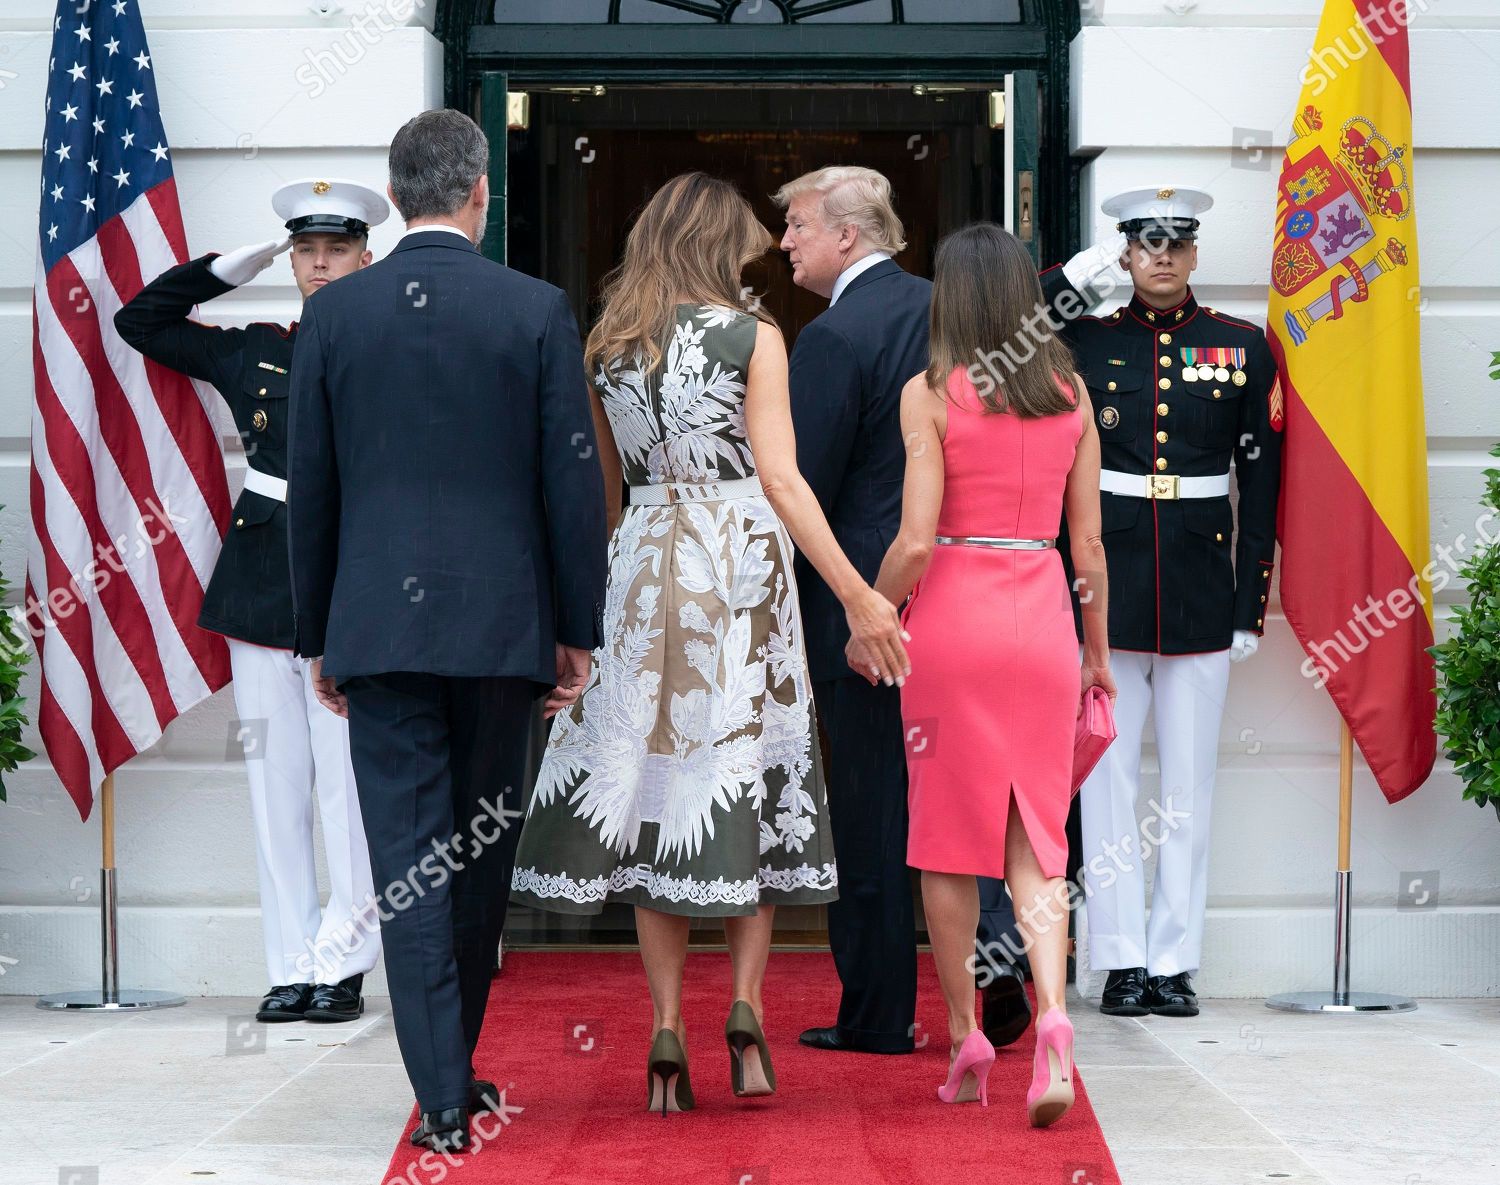 spanish-royals-visit-to-the-usa-shutterstock-editorial-9721999q.jpg